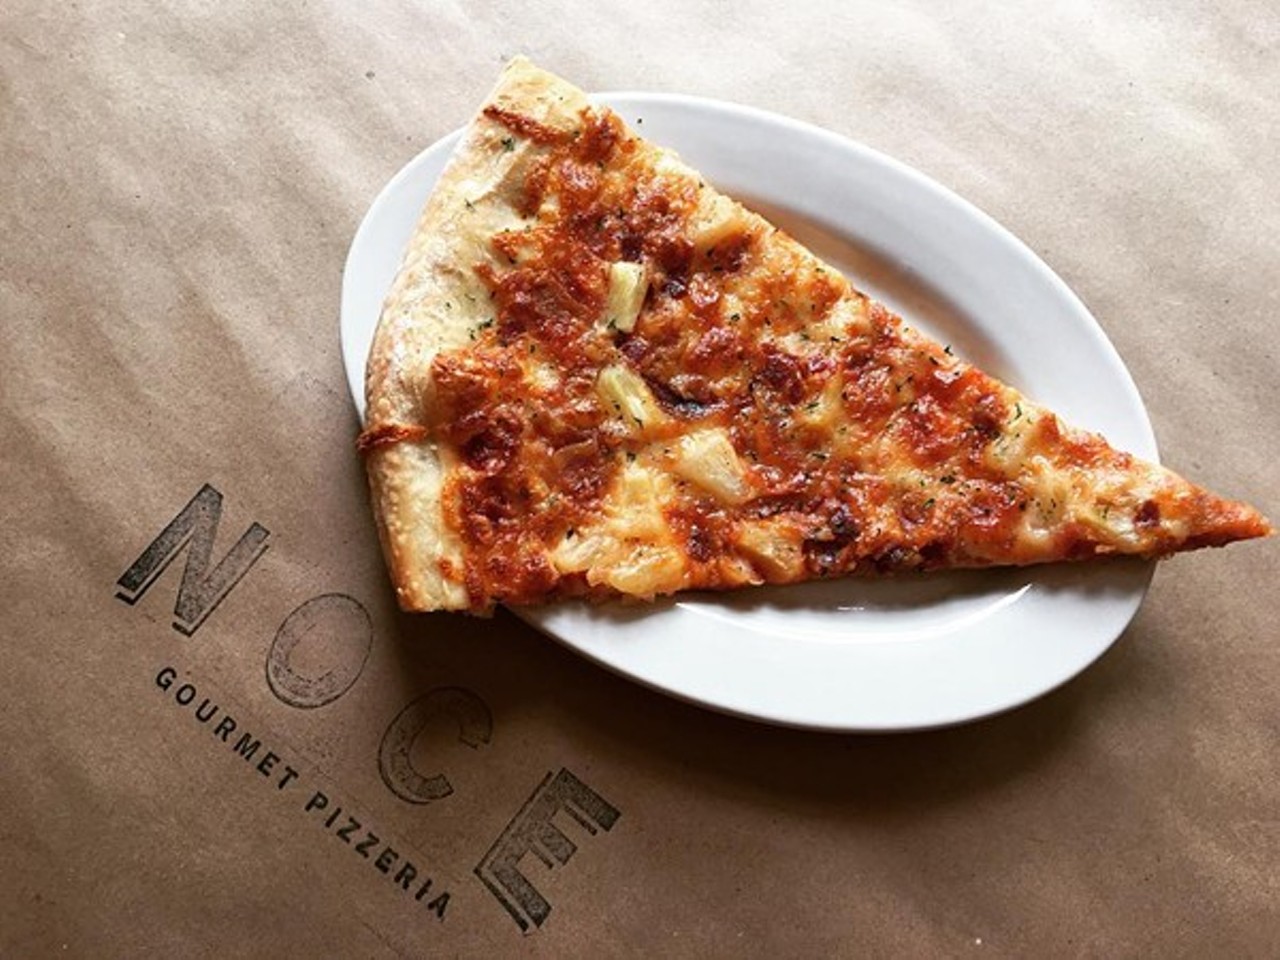  Noce
125 Main St., Chardon 
This mom-and-pop shop may be out in the cut, but any pizza this good is worth the drive. The New York style slices boast some of the best ingredients and quality of any spot around.
Photo via Scene Archives